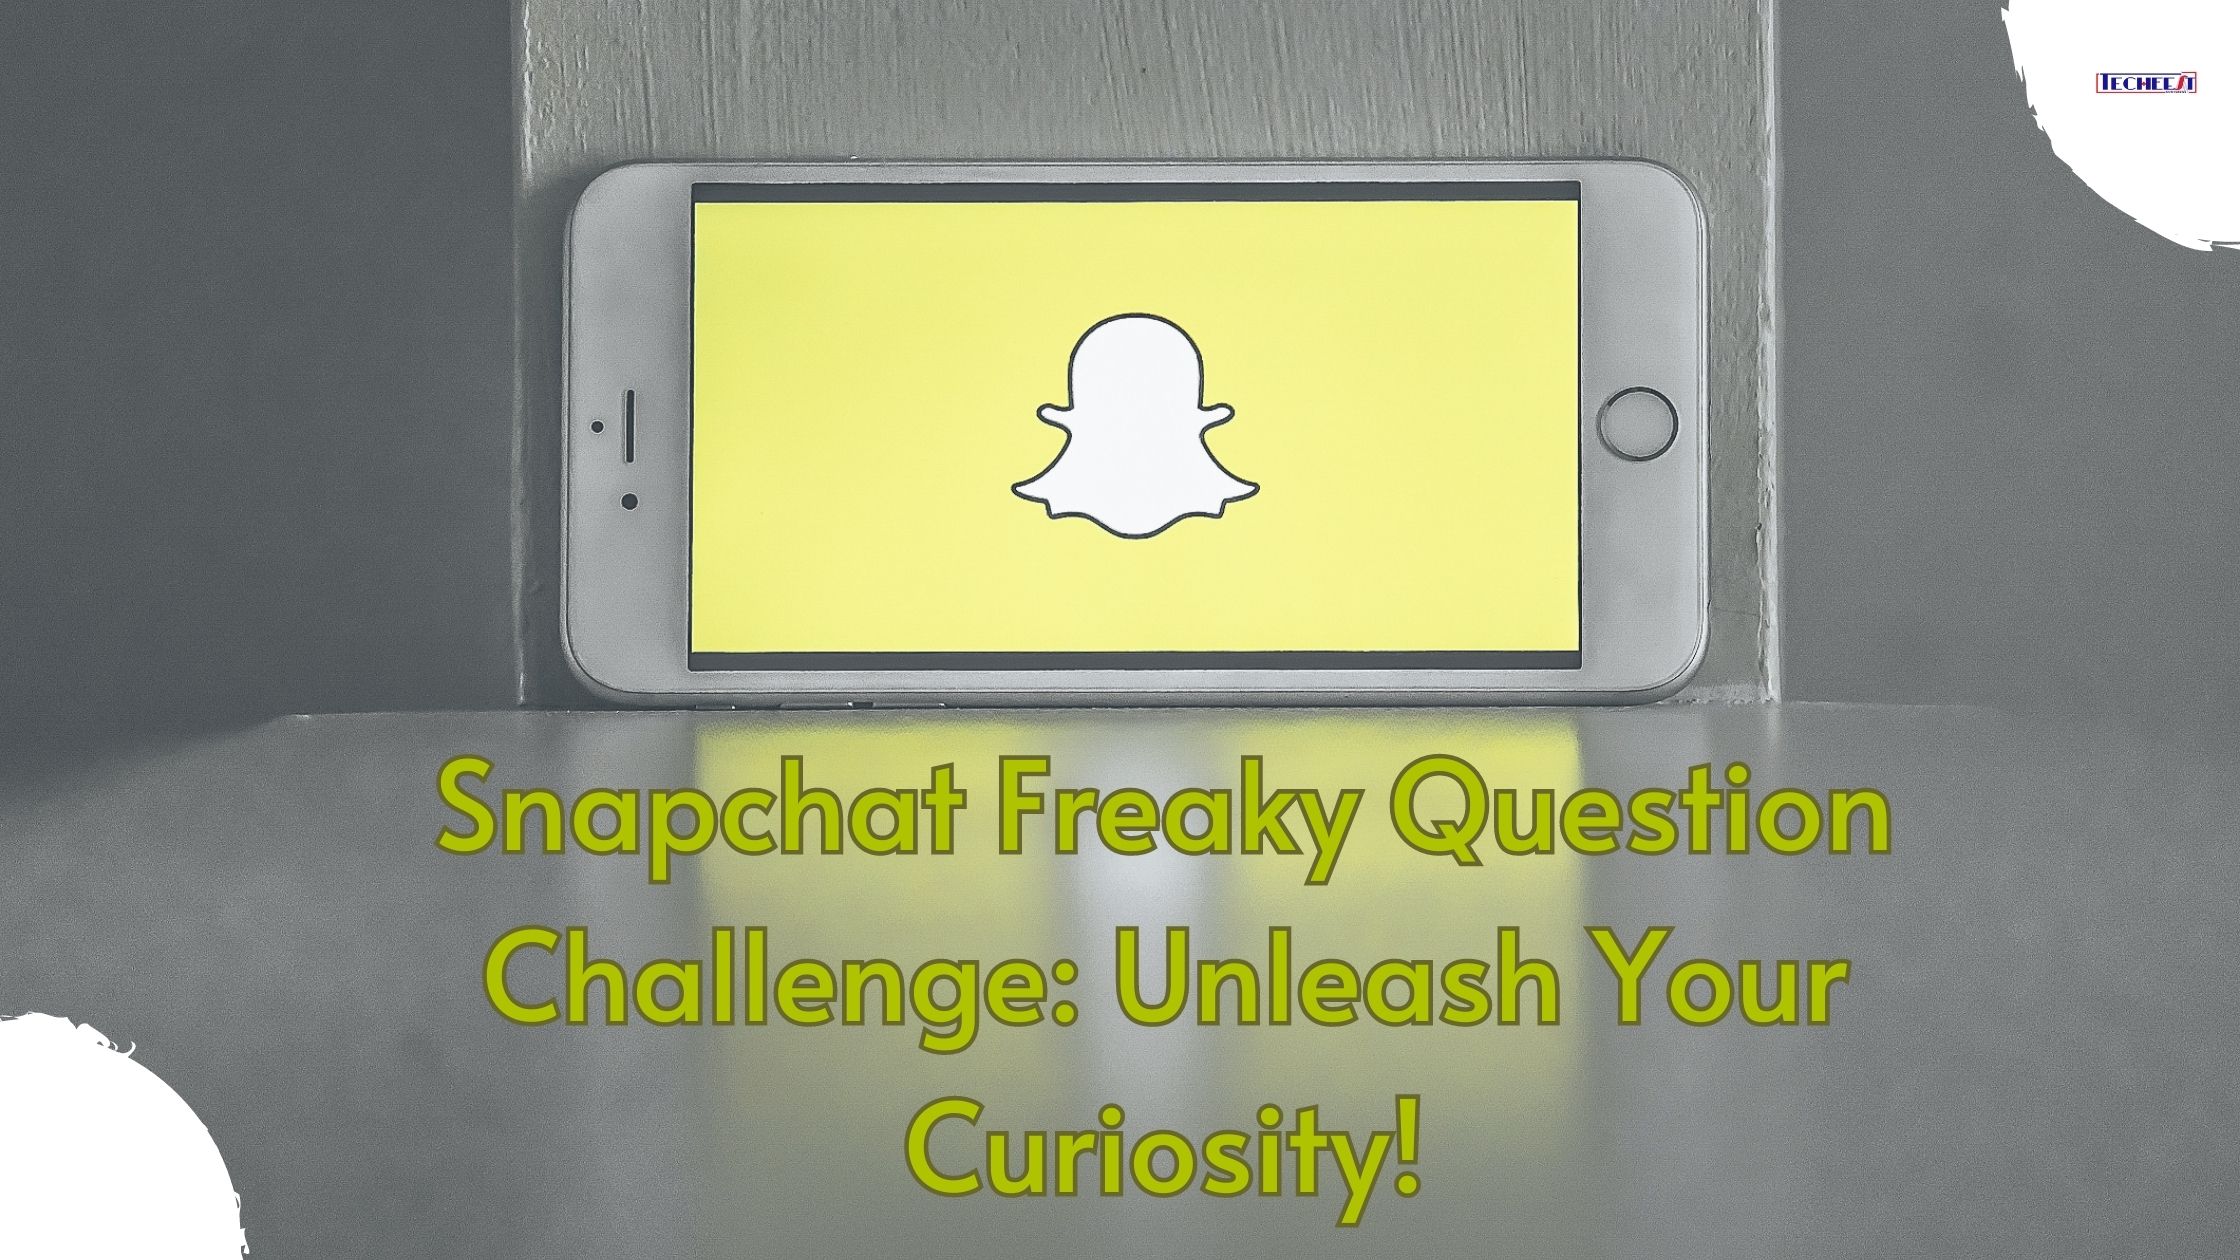 Snapchat Freaky Question Challenge Unleash Your Curiosity!